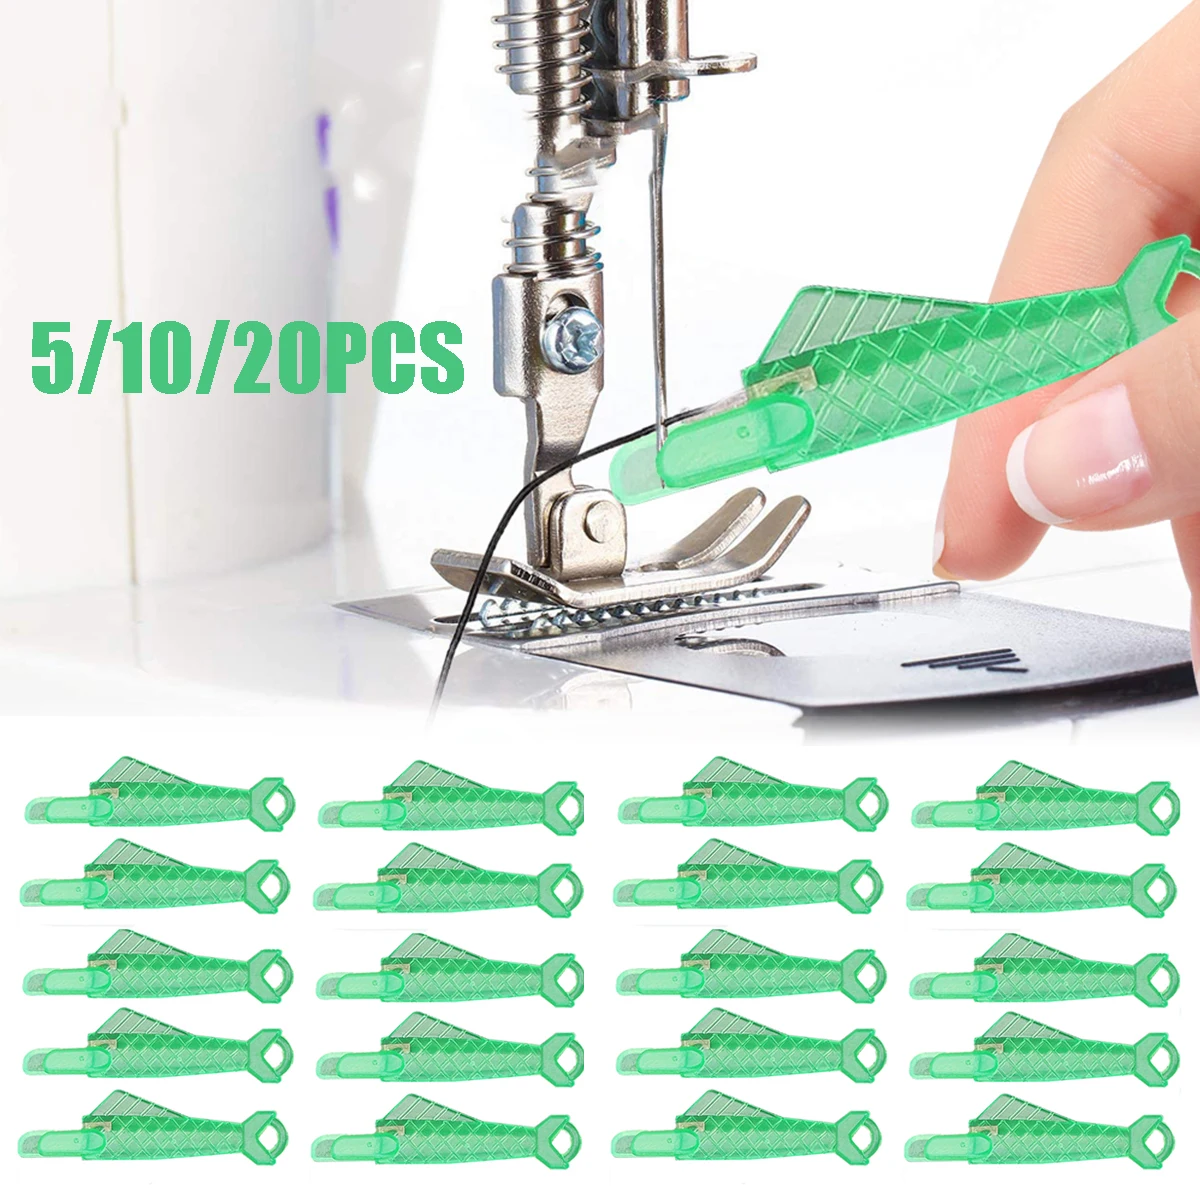 5/10/20Pcs Sewing Machine Needle Threader with Hook Mini Fish Type Elderly Quick Automatic Changer for DIY Sewing Accessories